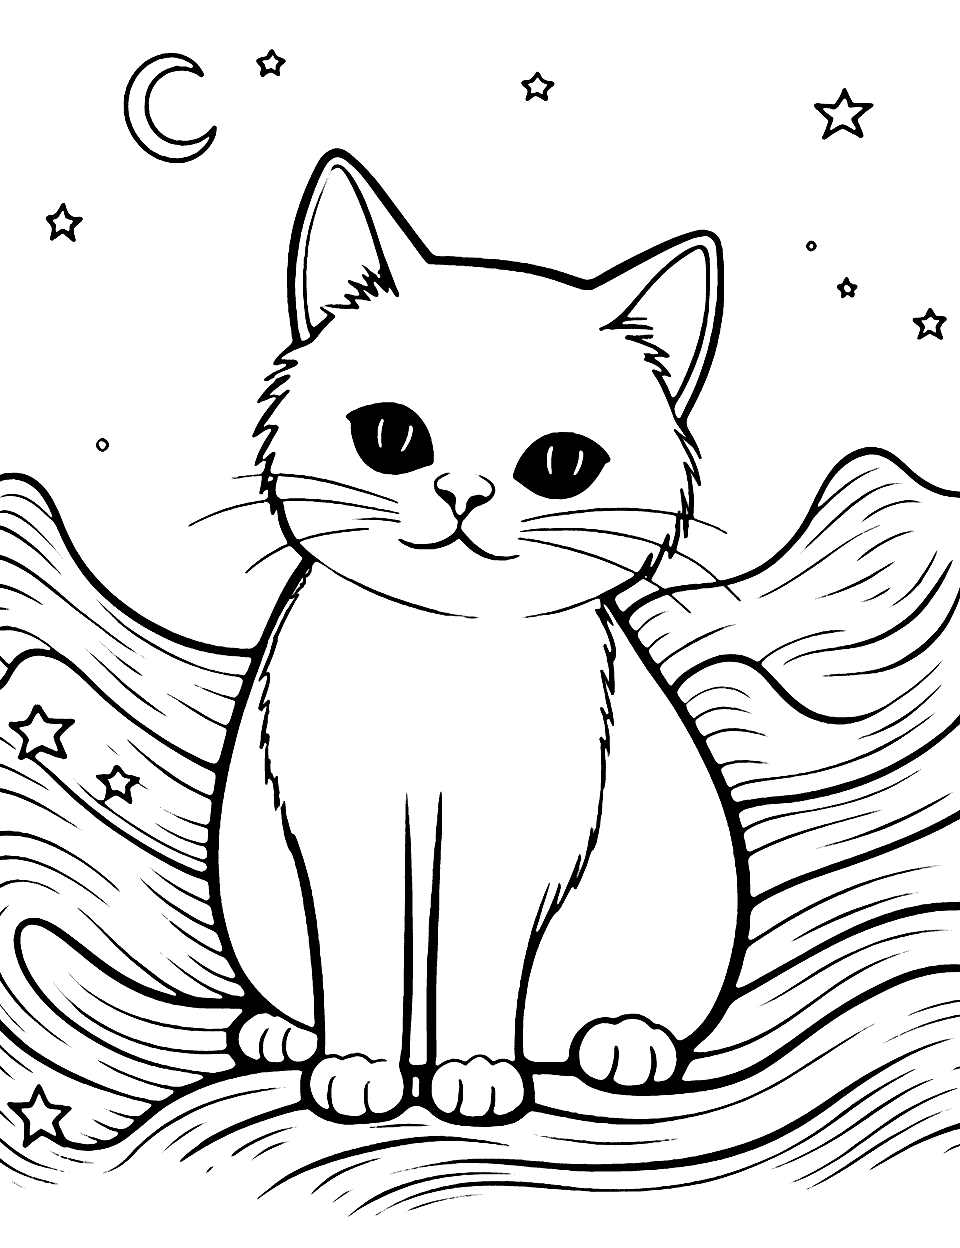 Cat in the Stars Coloring Page - A cat silhouette filled with a starry night sky, perfect for advanced colorists.